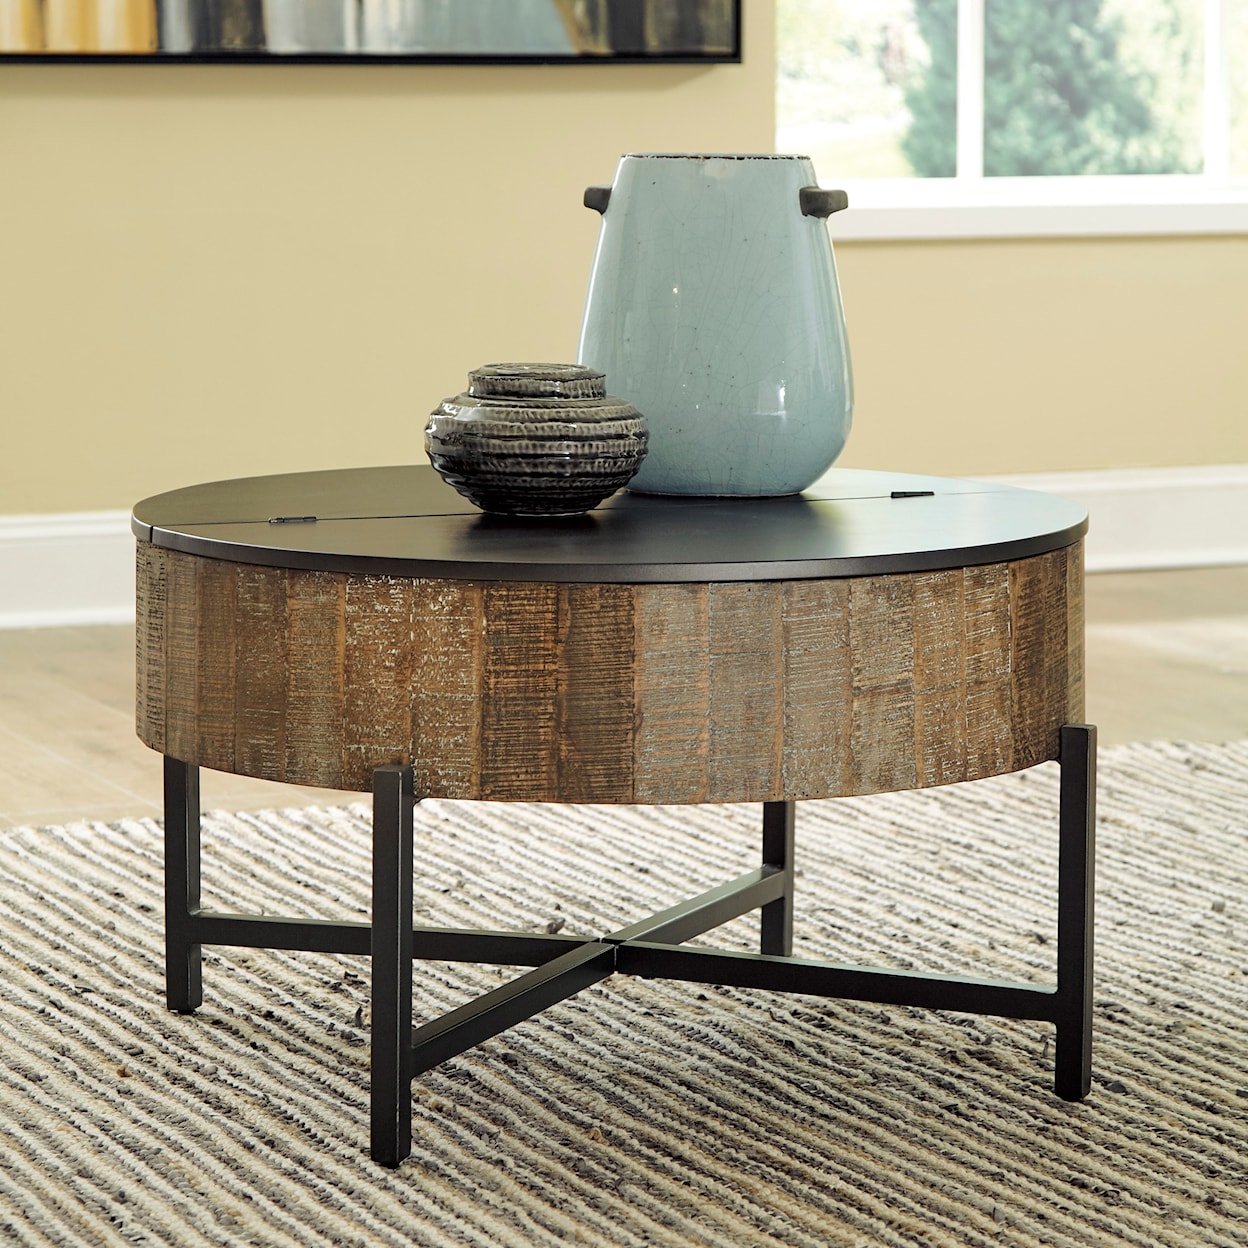 Belfort Select Nashbryn Round Cocktail Table